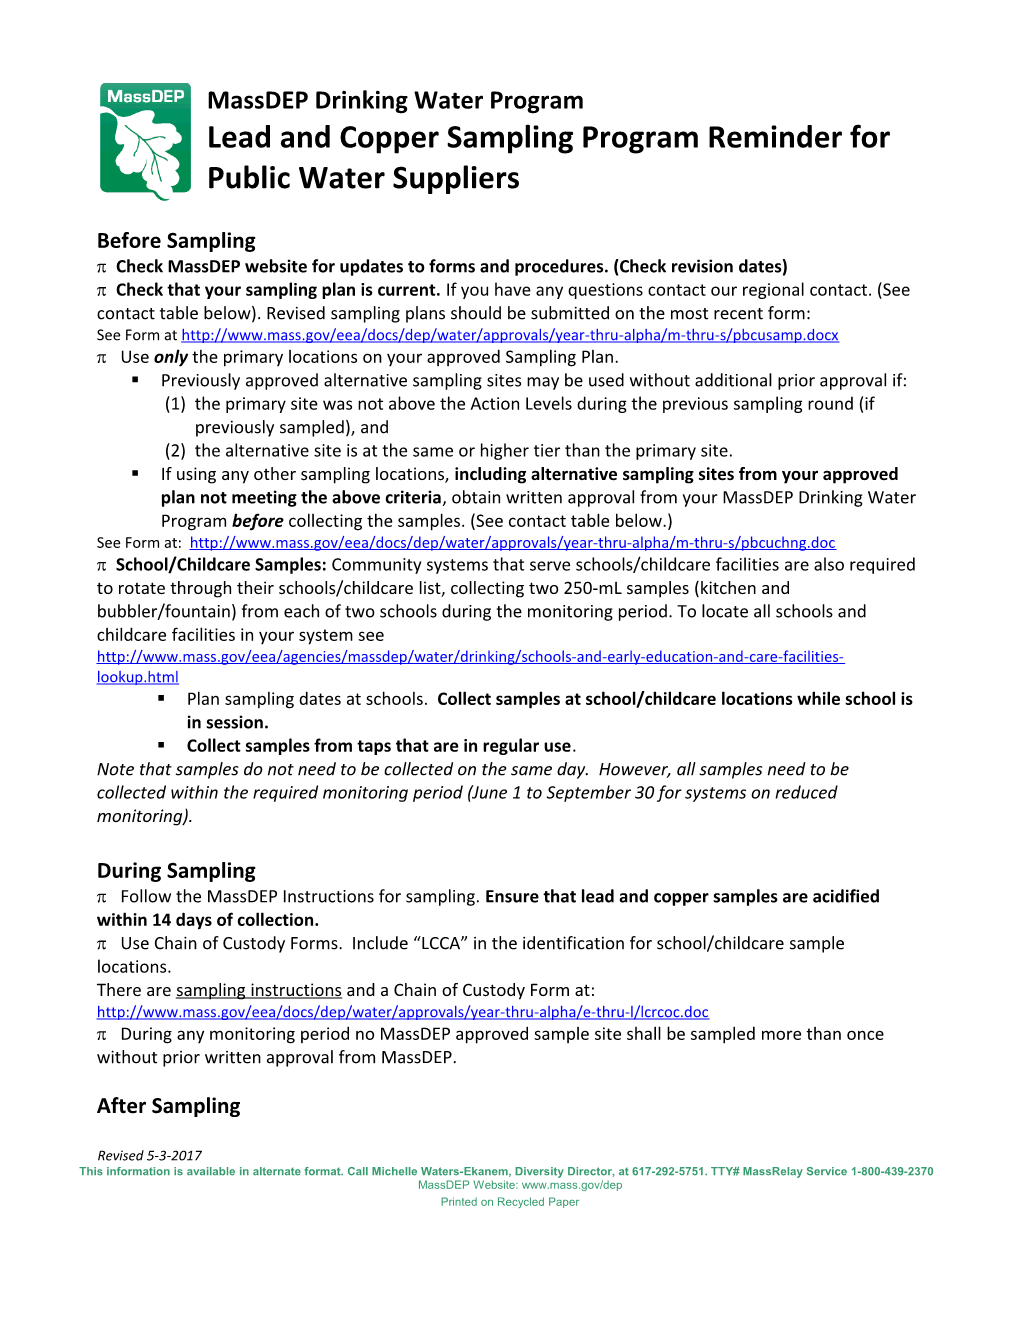 Lead and Copper Sampling Program Reminder for Public Water Suppliers